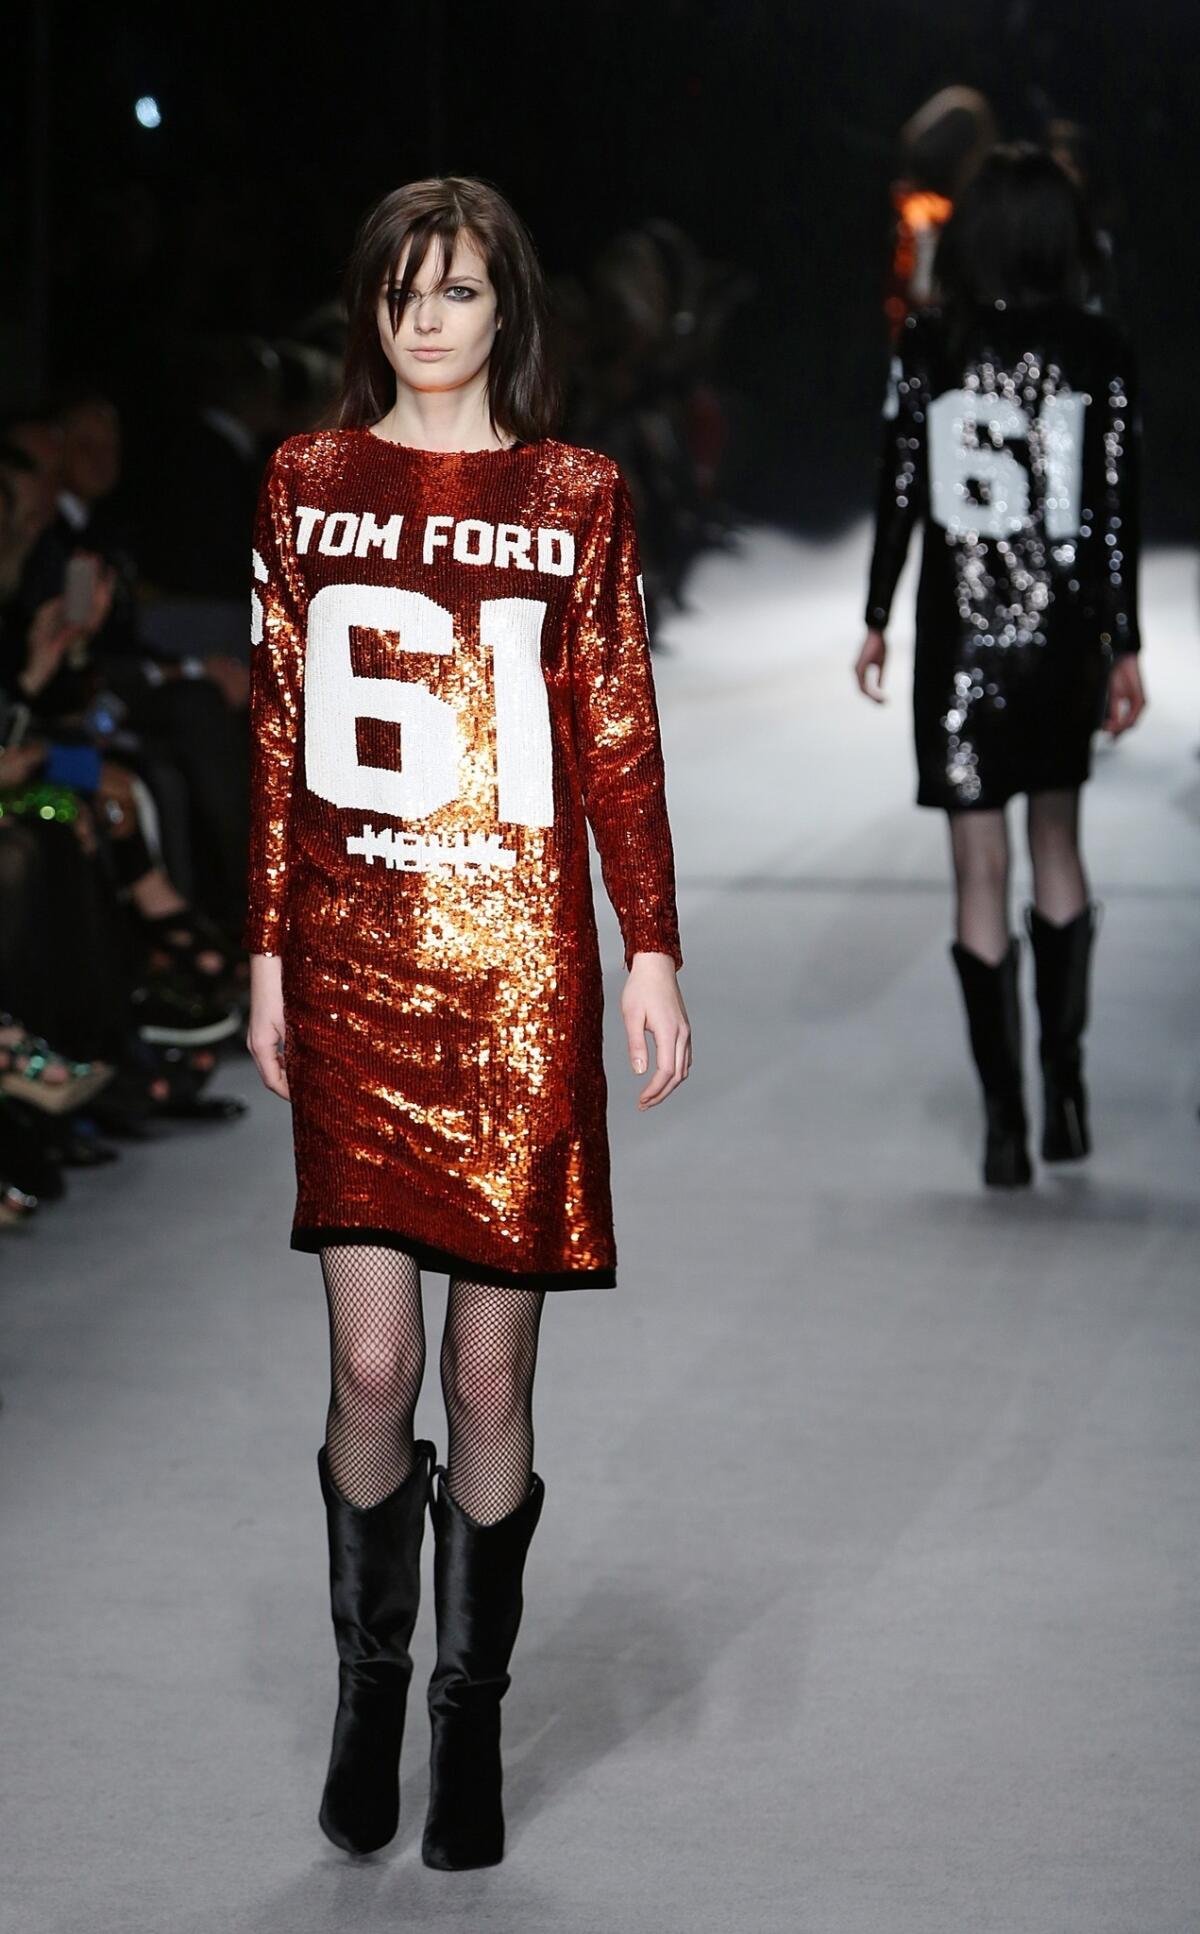 Models wear dresses with Jay-Z-inspired graphics at Tom Ford's London Fashion Week show.